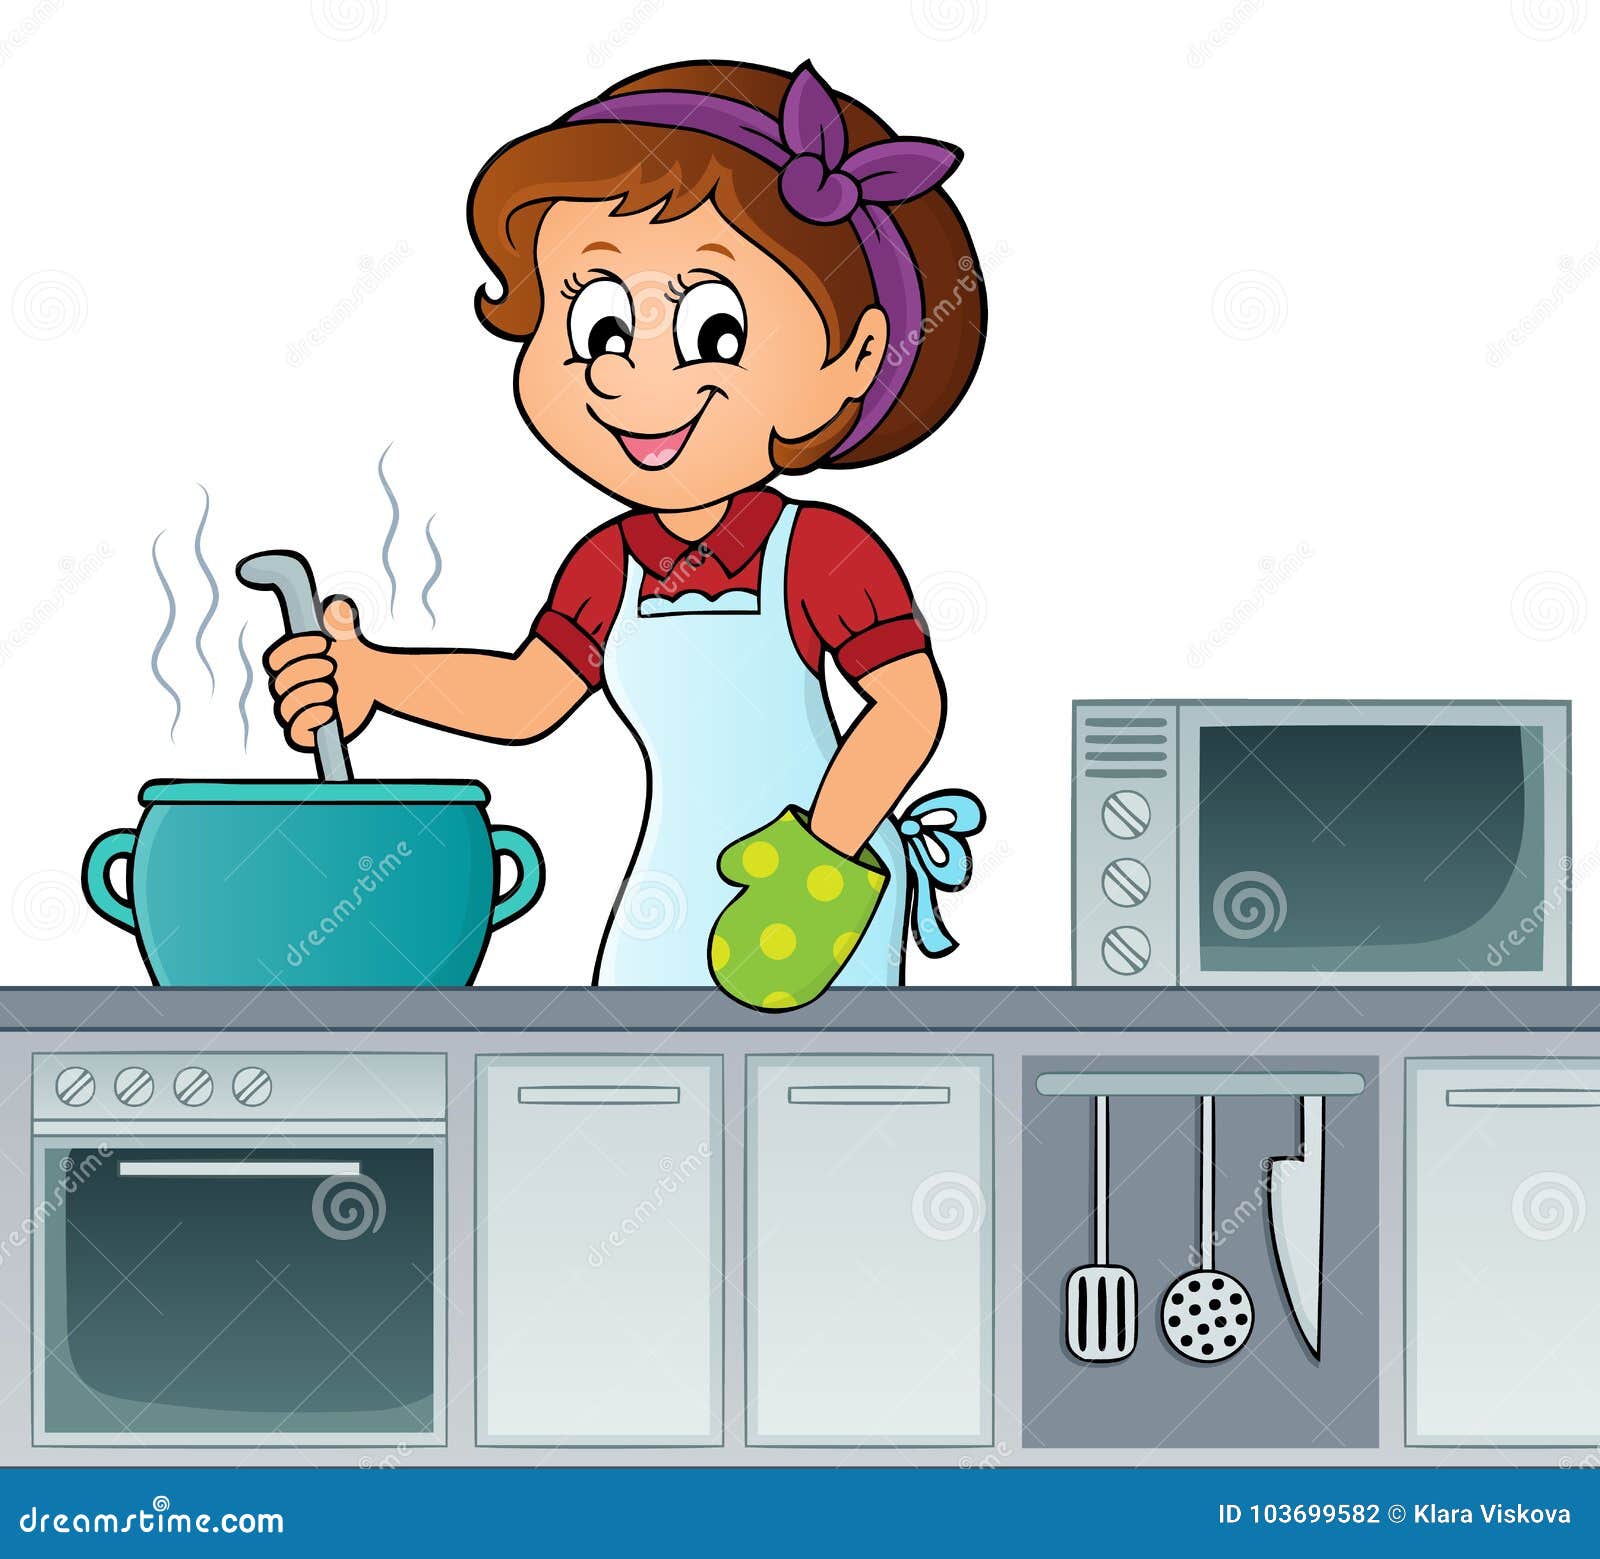 female cook topic image 2